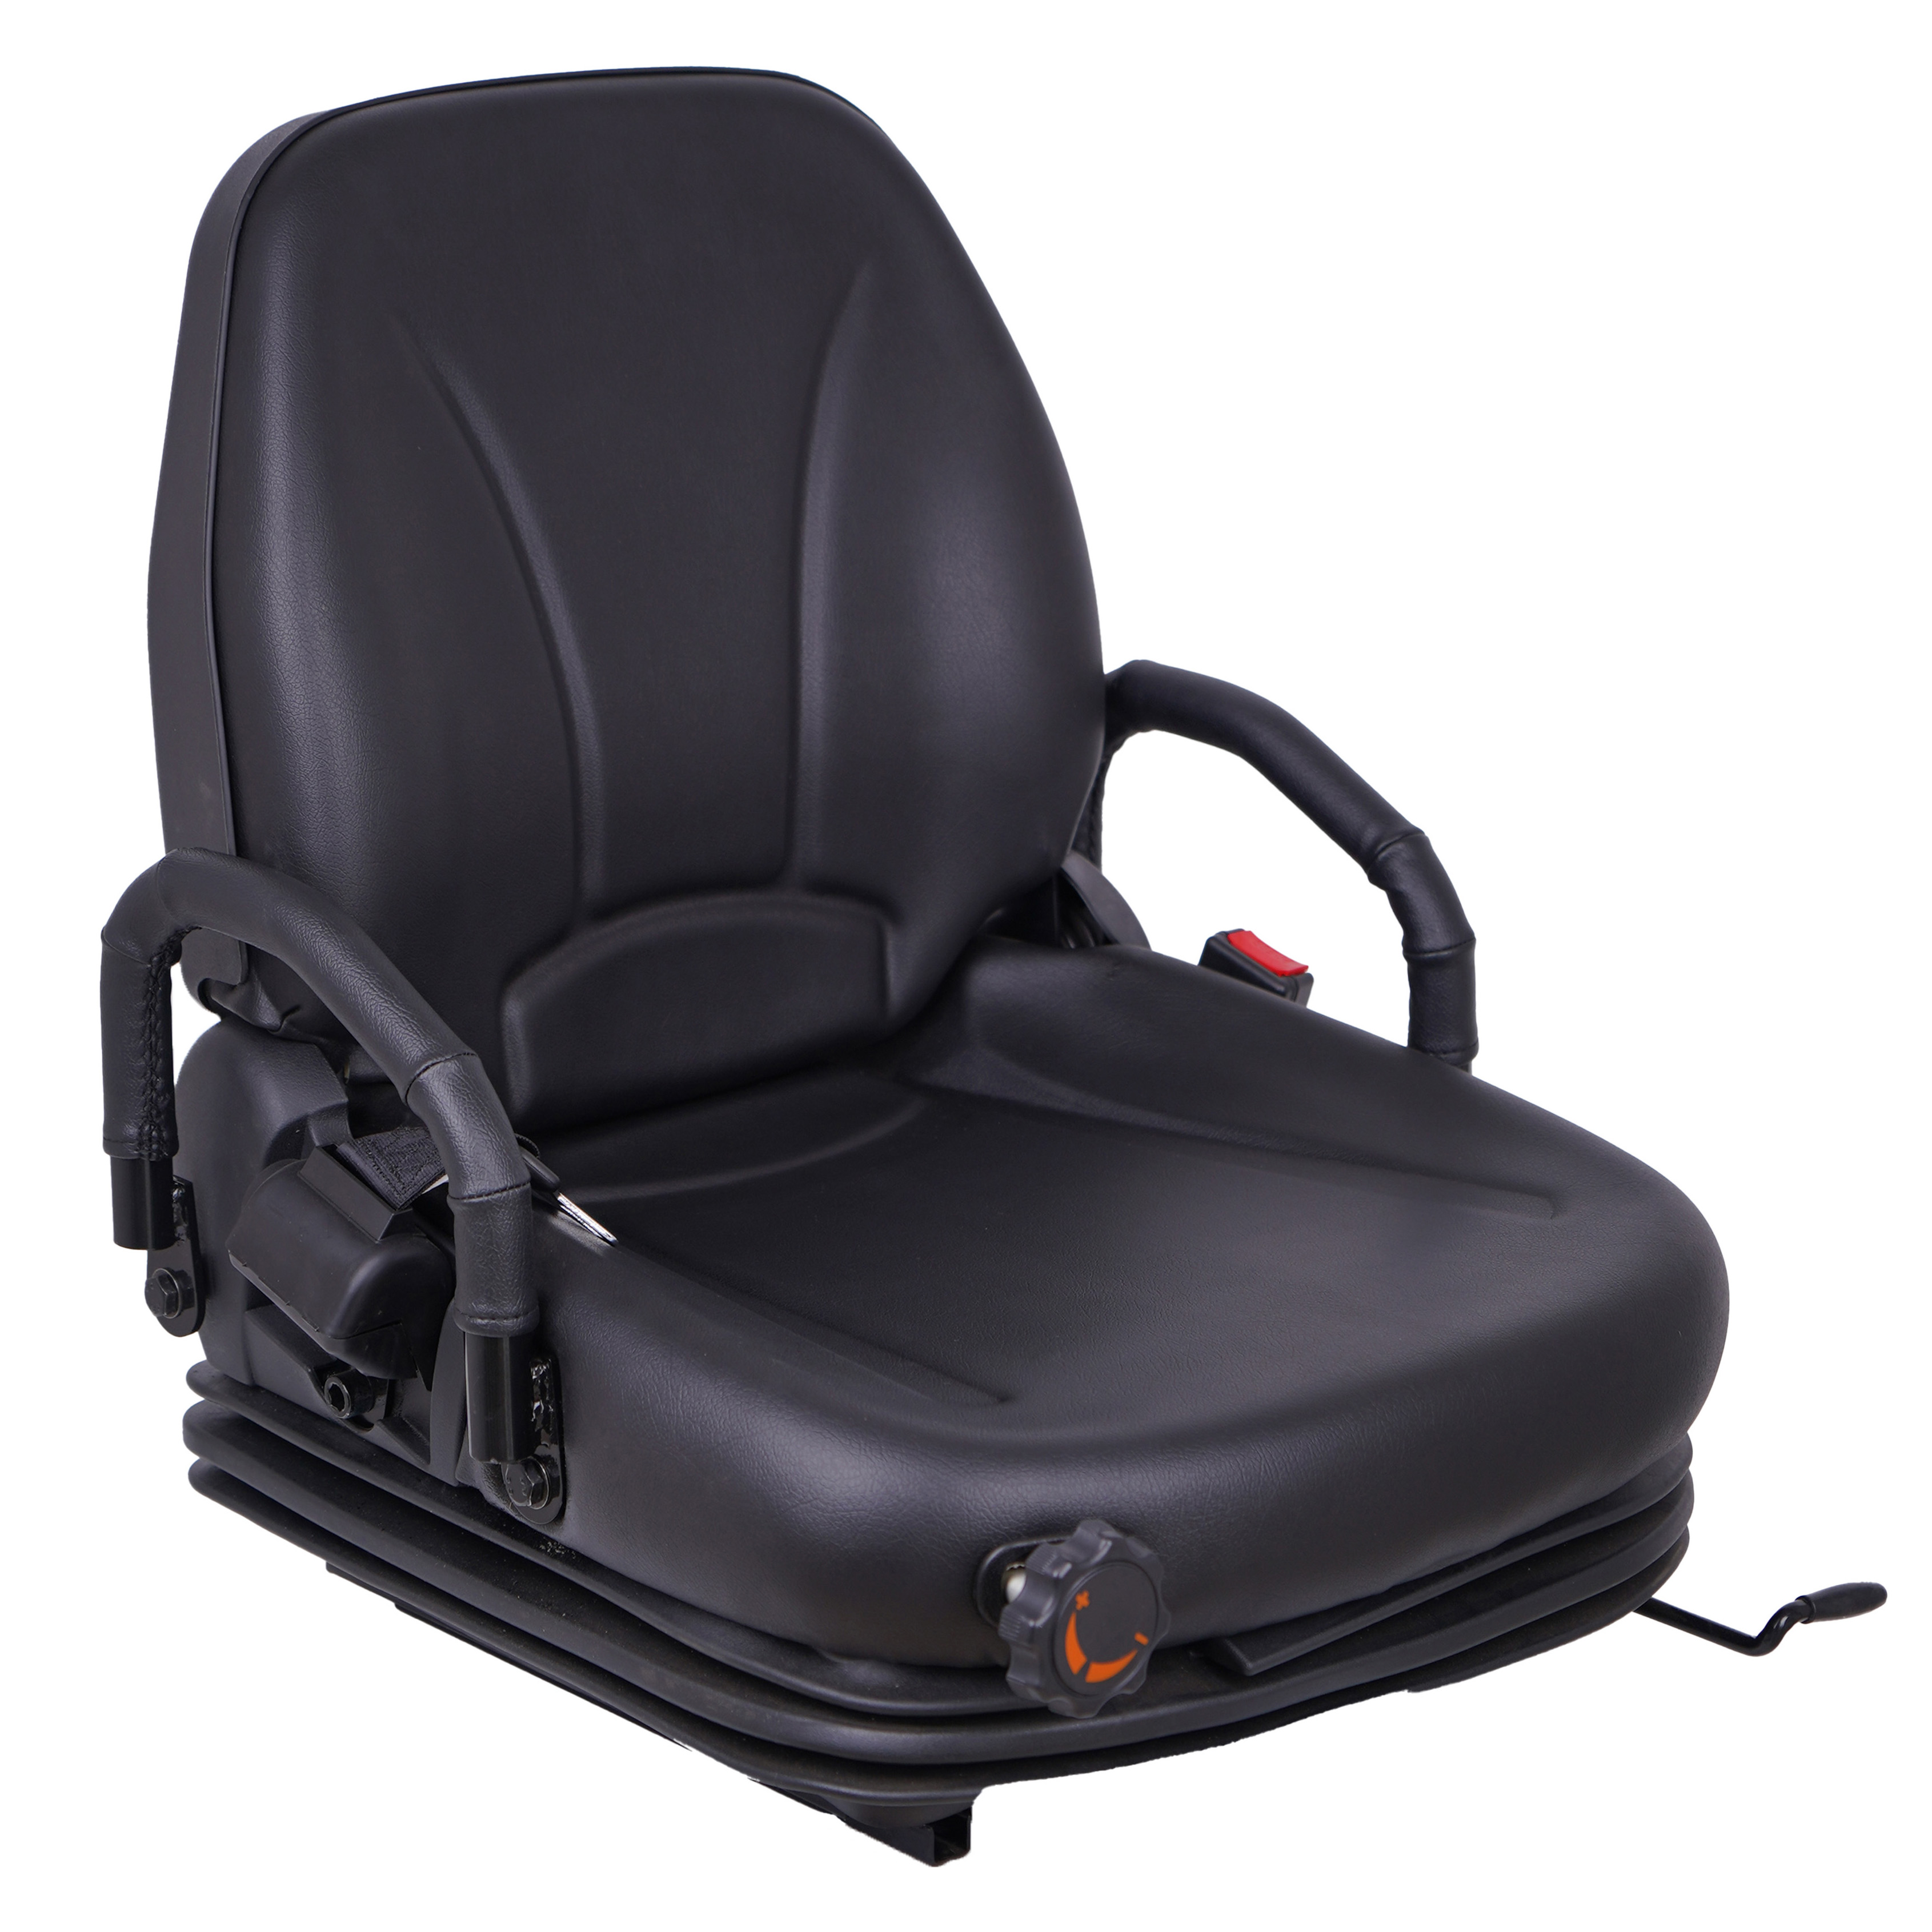 Lift Truck Seat, Forklift Truck Seat, Reach Truck Seat Featured Image